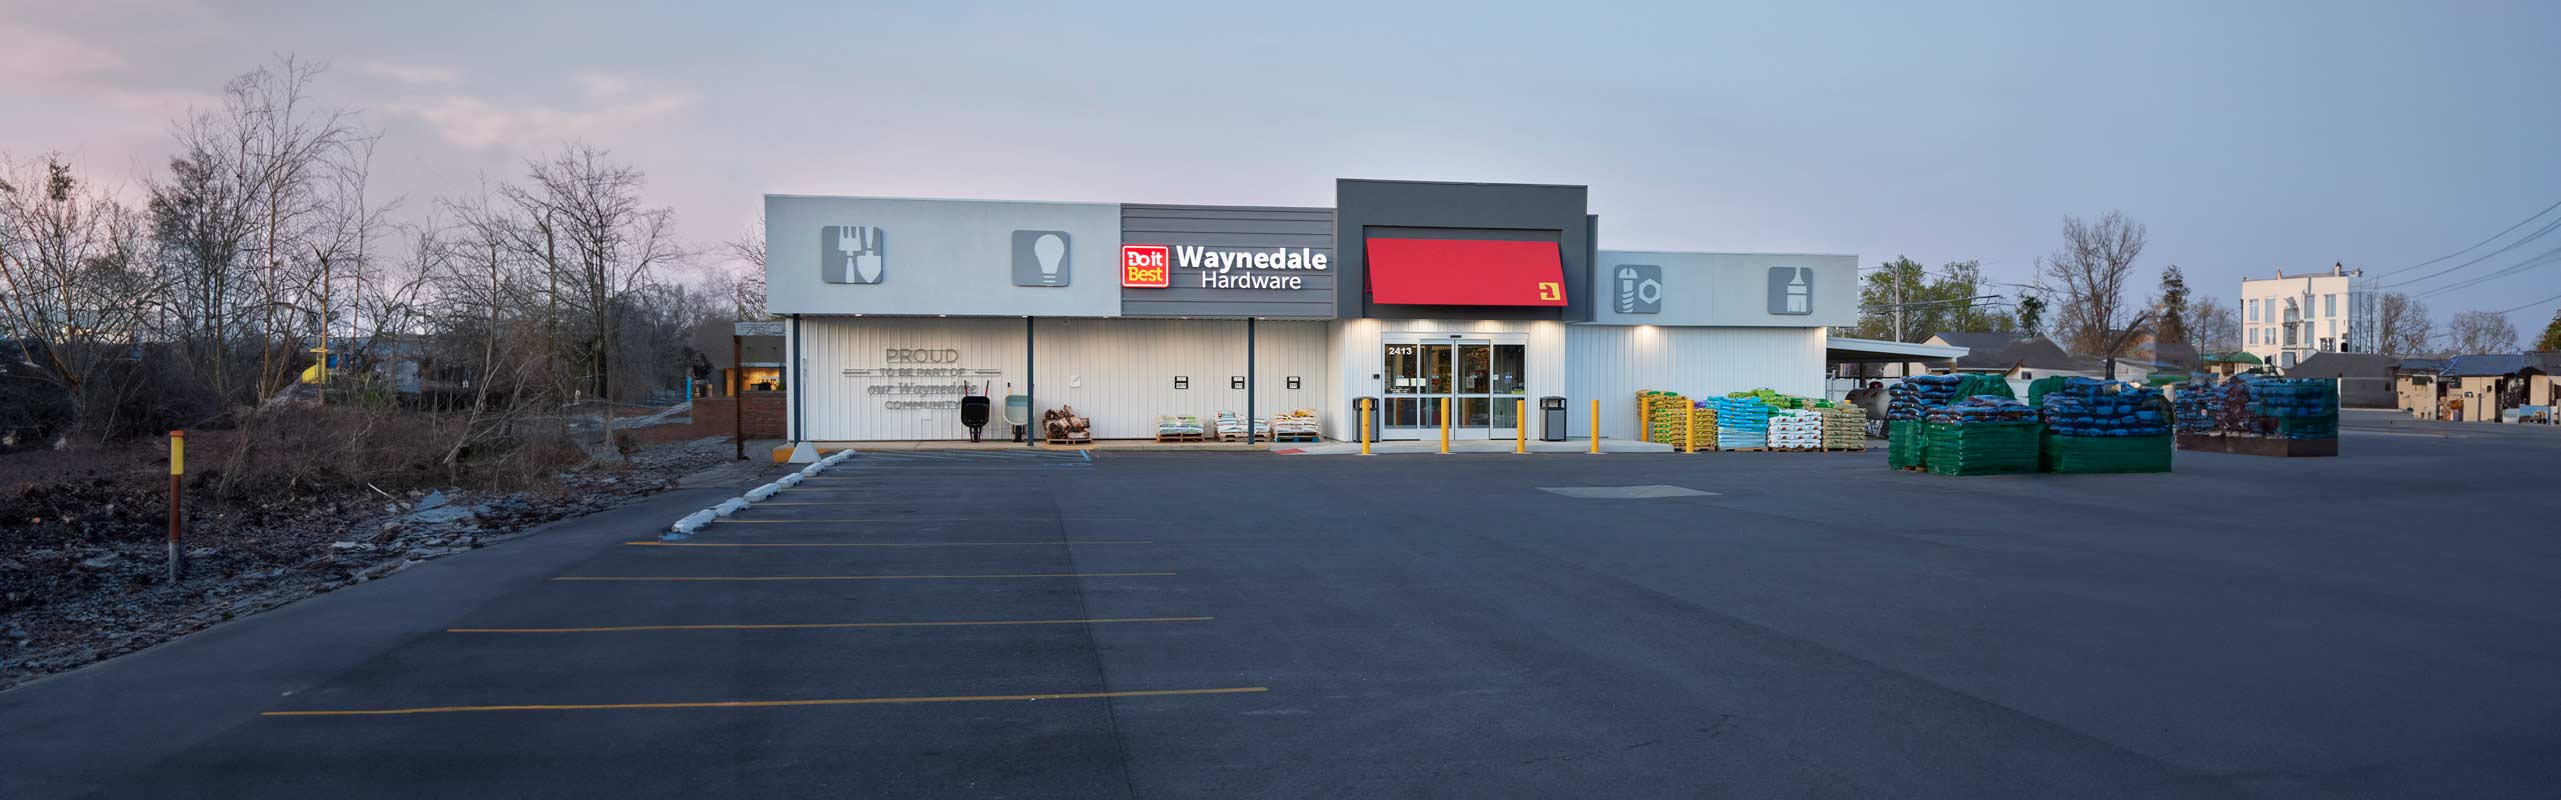 Waynedale Hardware Storefront with AI